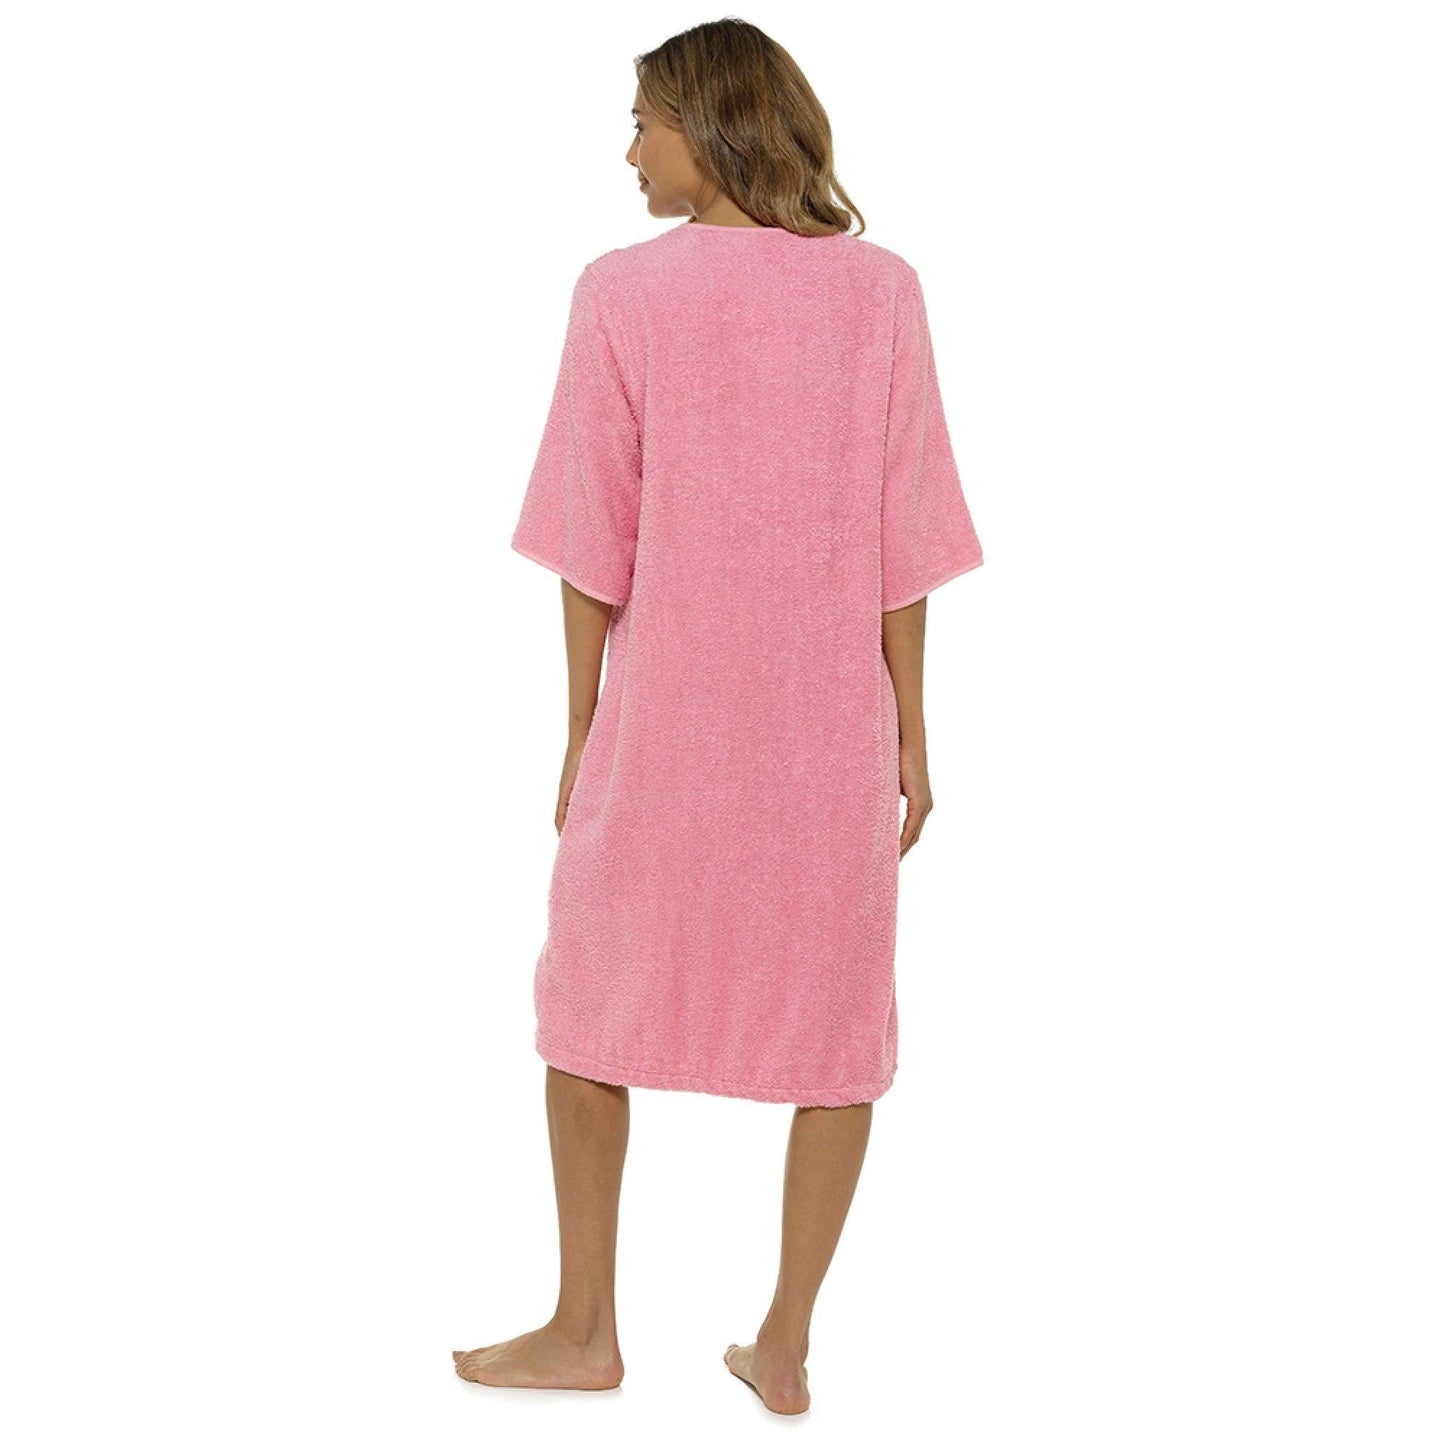 Ladies 100% Cotton Terry Towelling Zip Up Bath Robe Dressing Gown House Coat